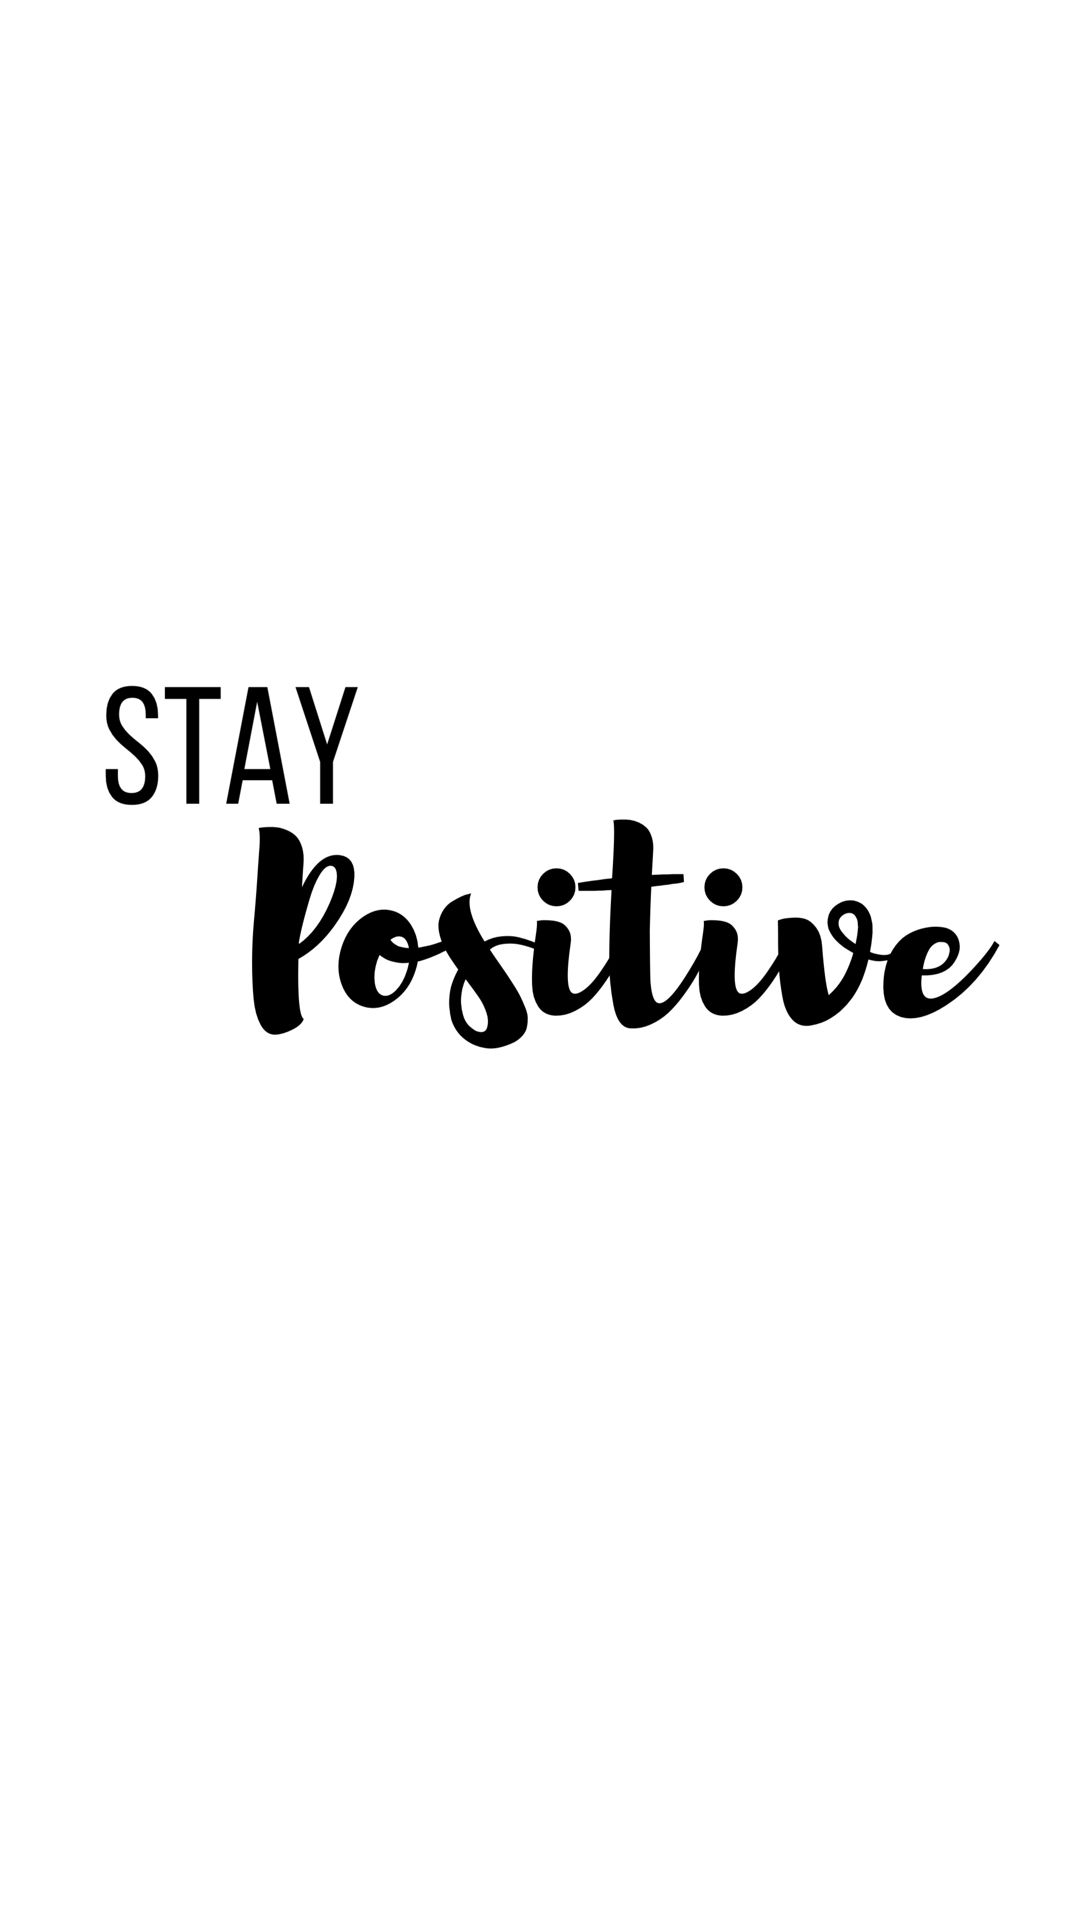 Stay Positive Wallpapers